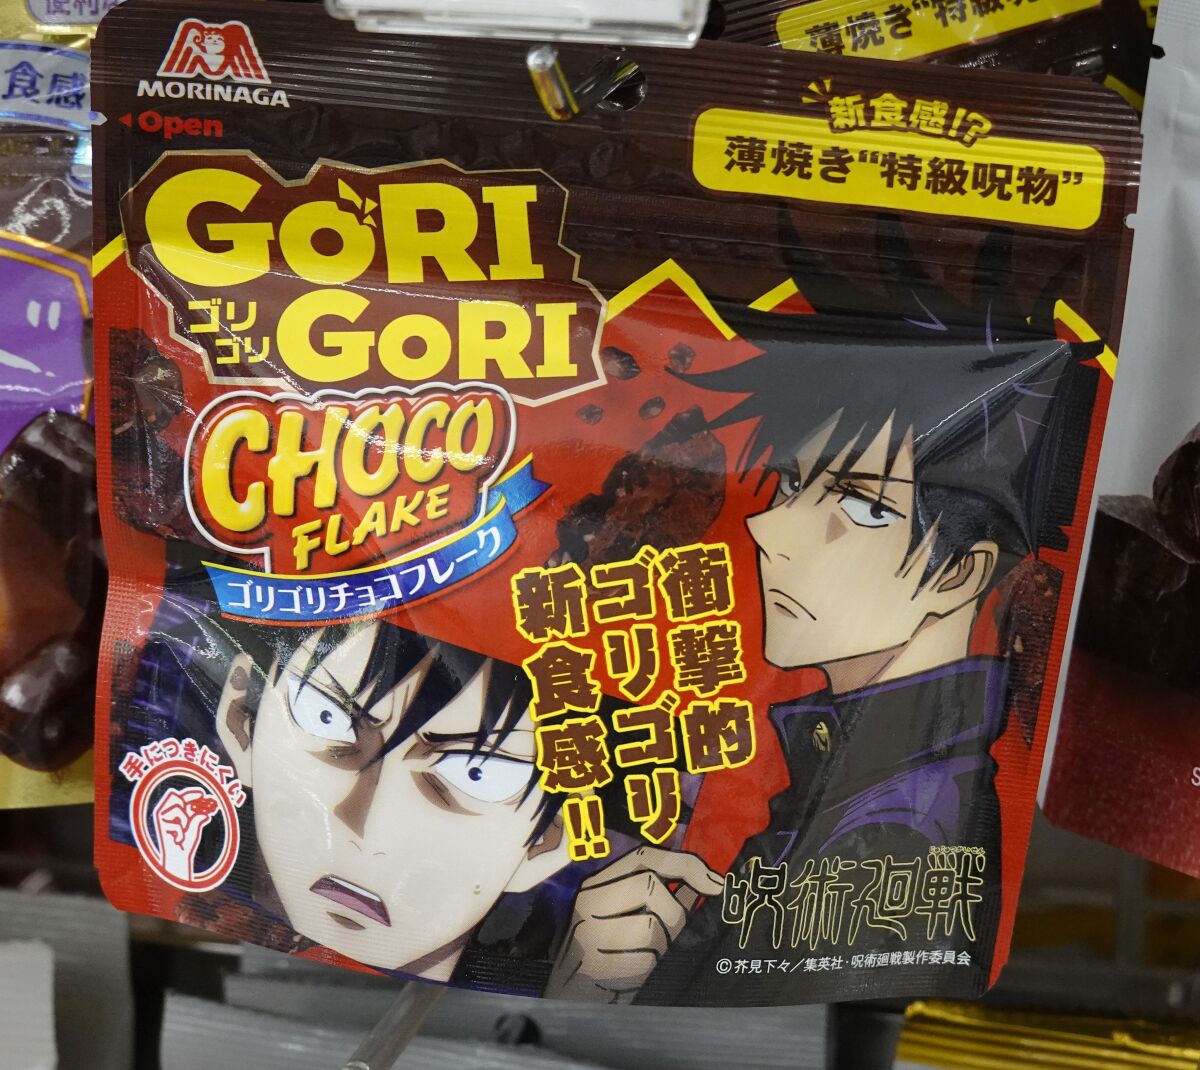 A package with anime characters is labeled "Gori Gori Choco Flake" at a 7-Eleven in Tokyo.